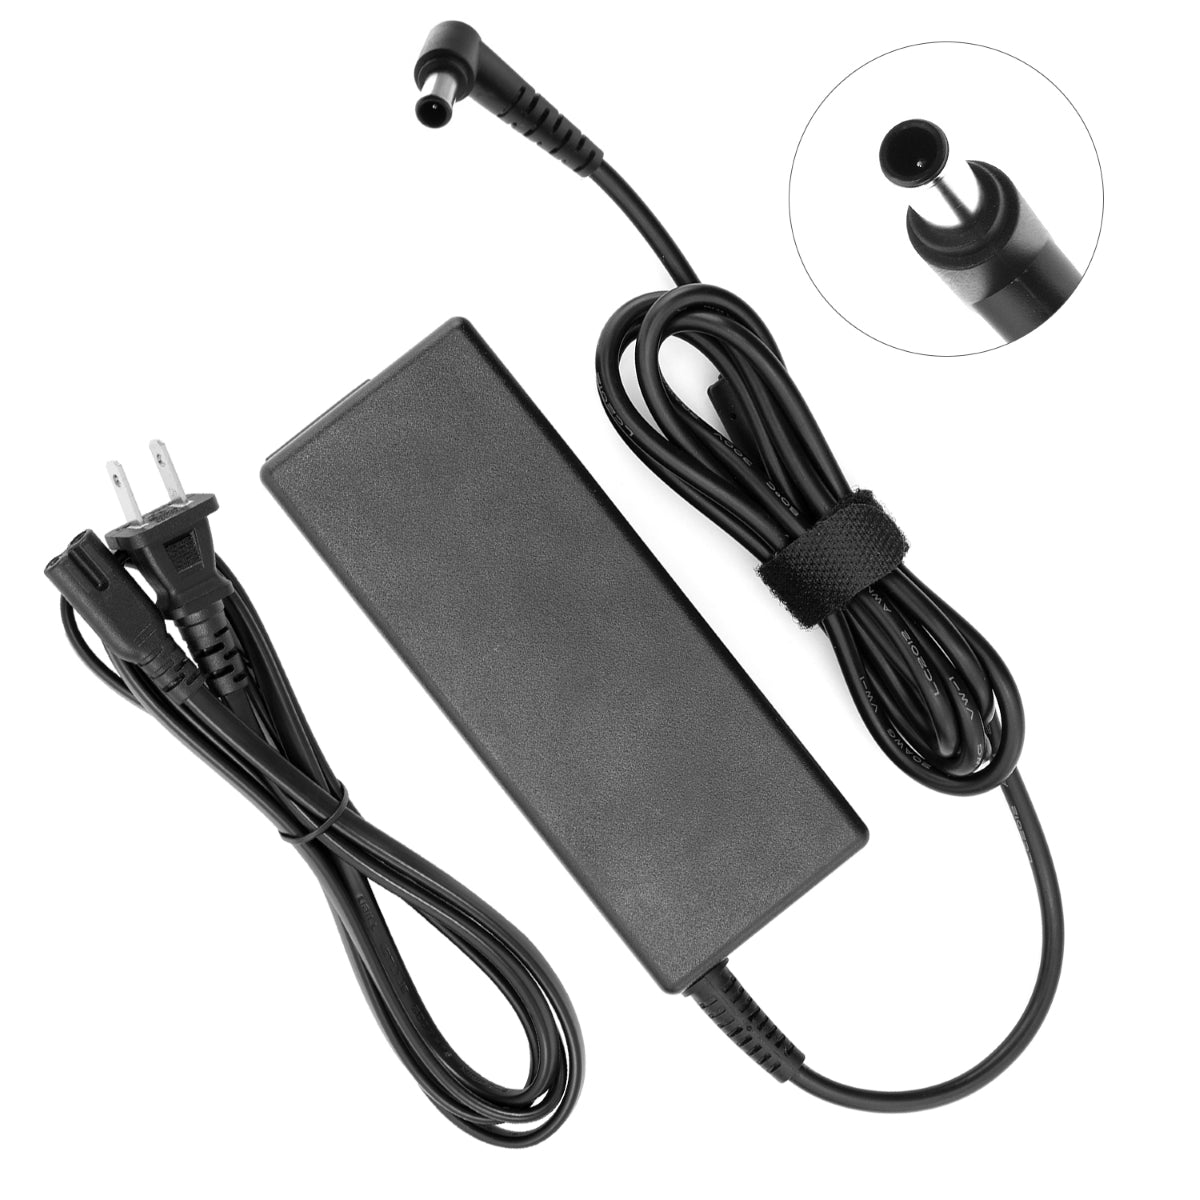 AC Adapter Power Supply for Compaq PE1206 Monitor